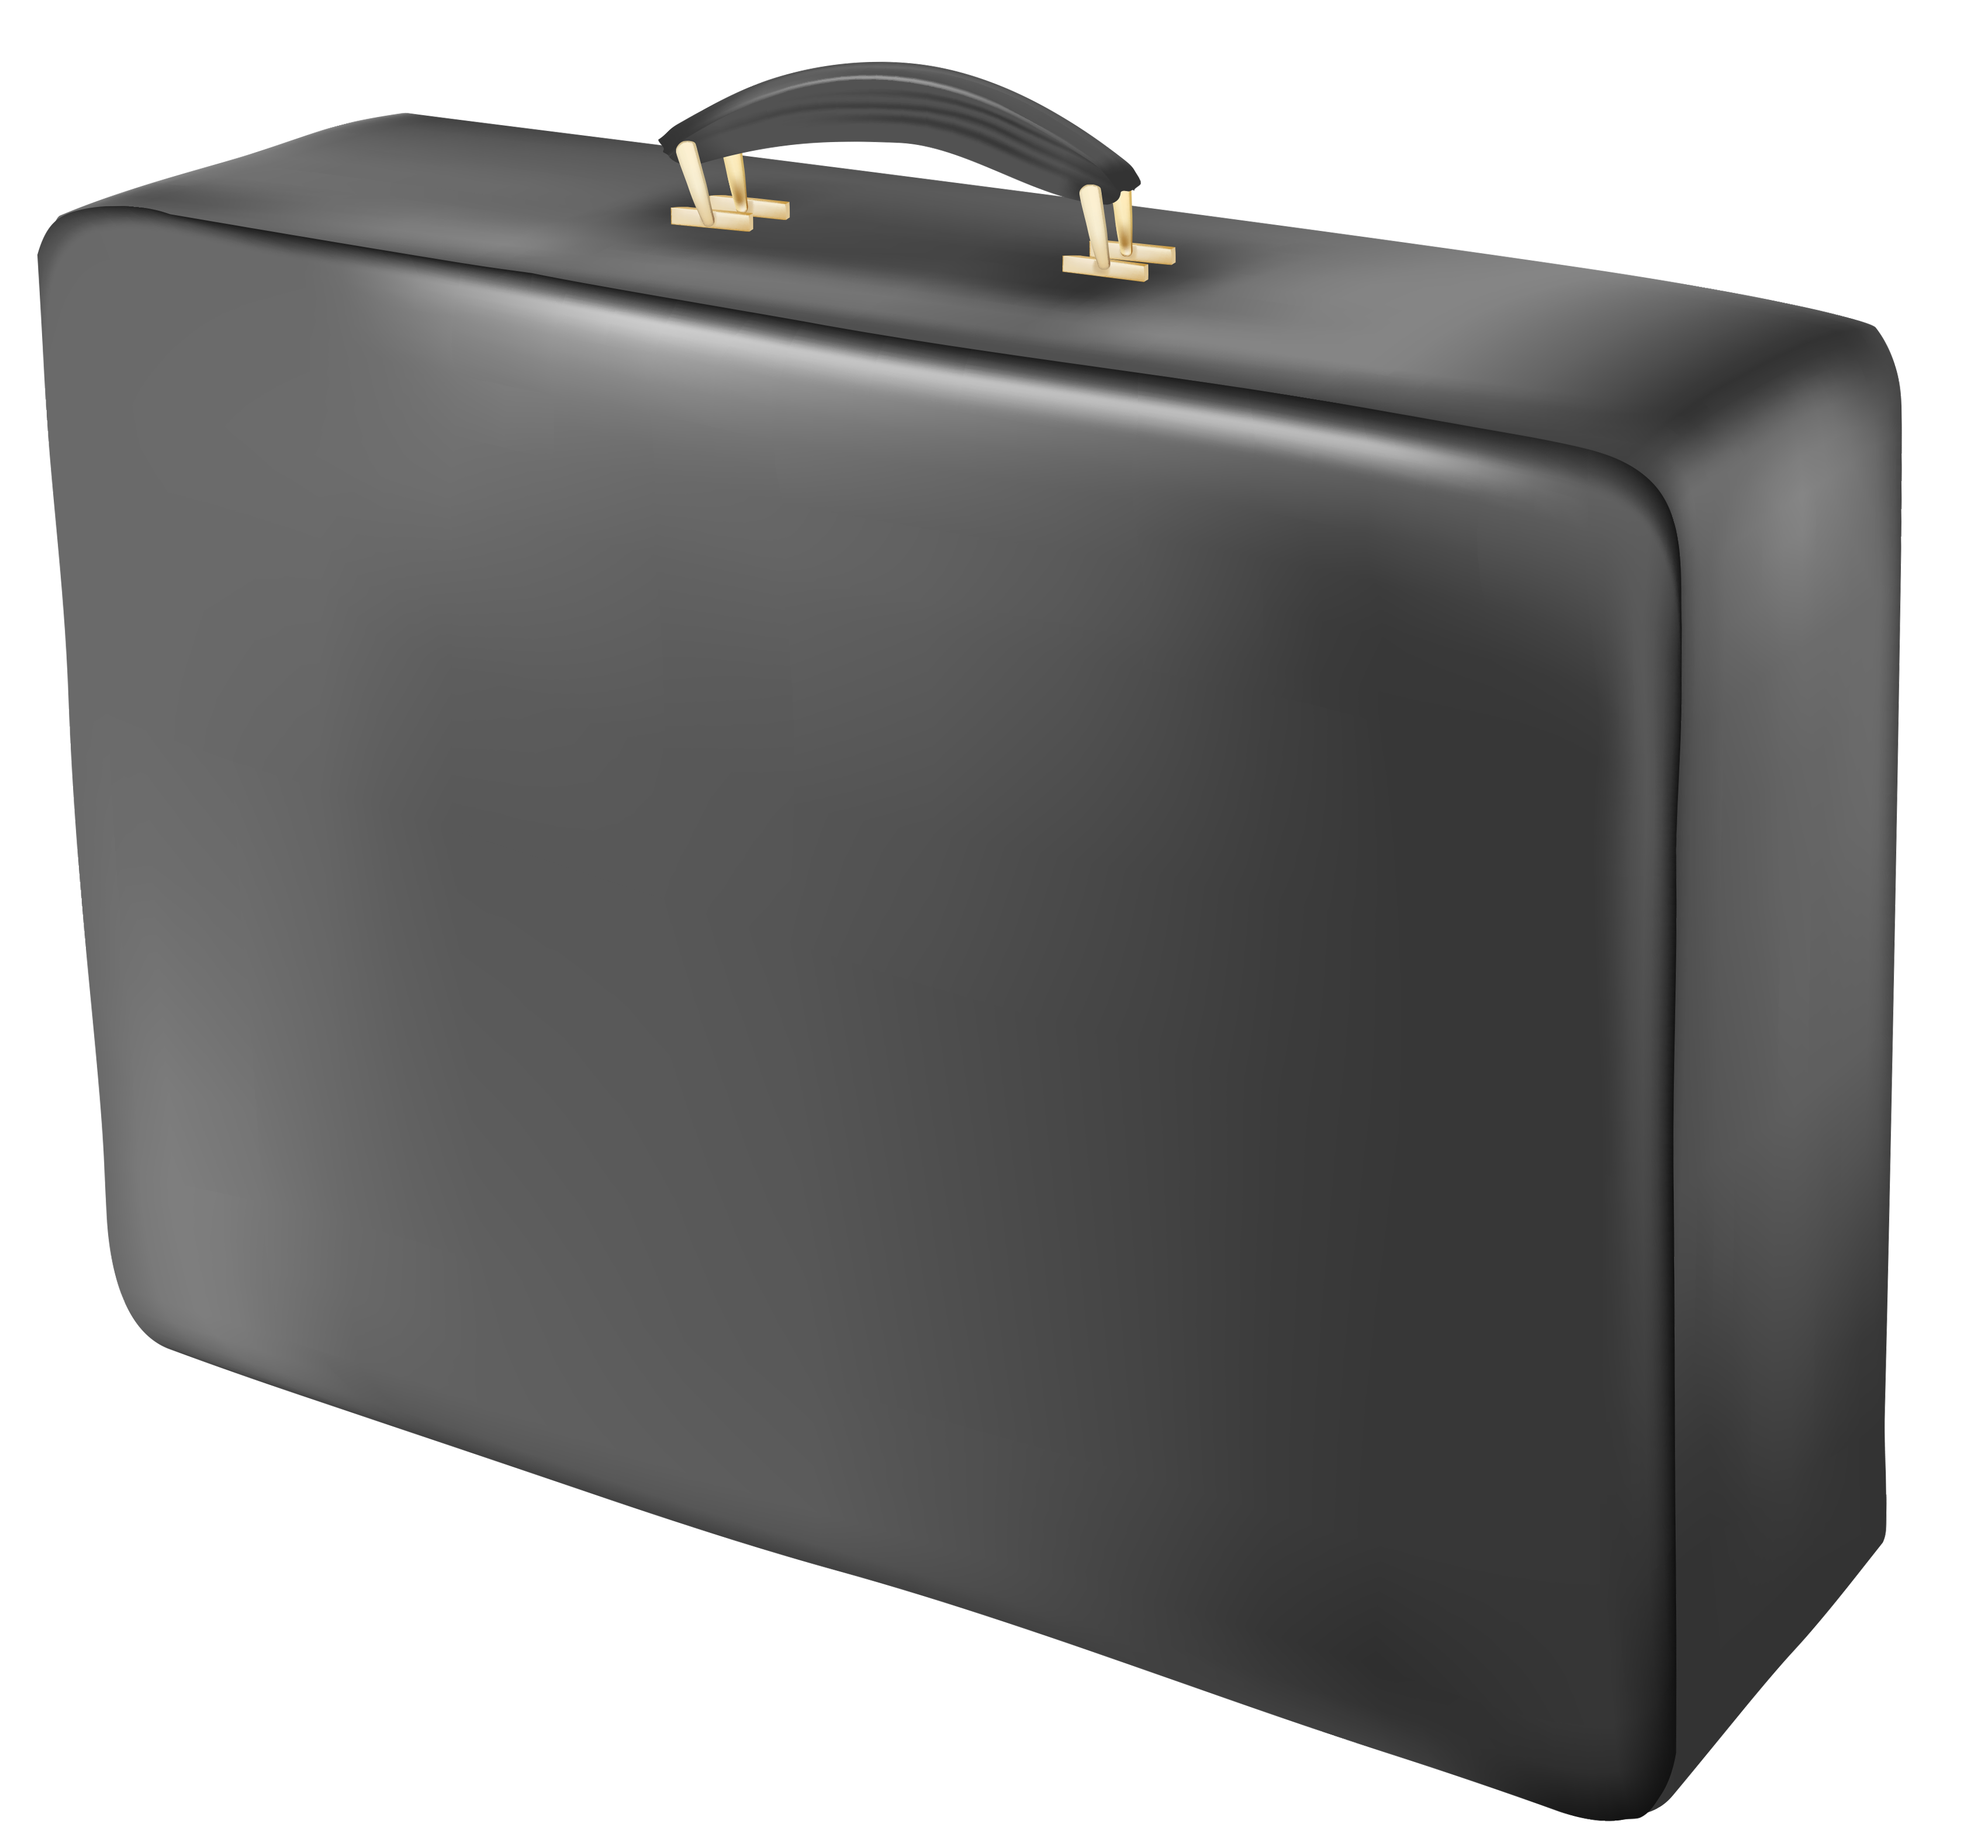 Briefcase HD PNG - 117287